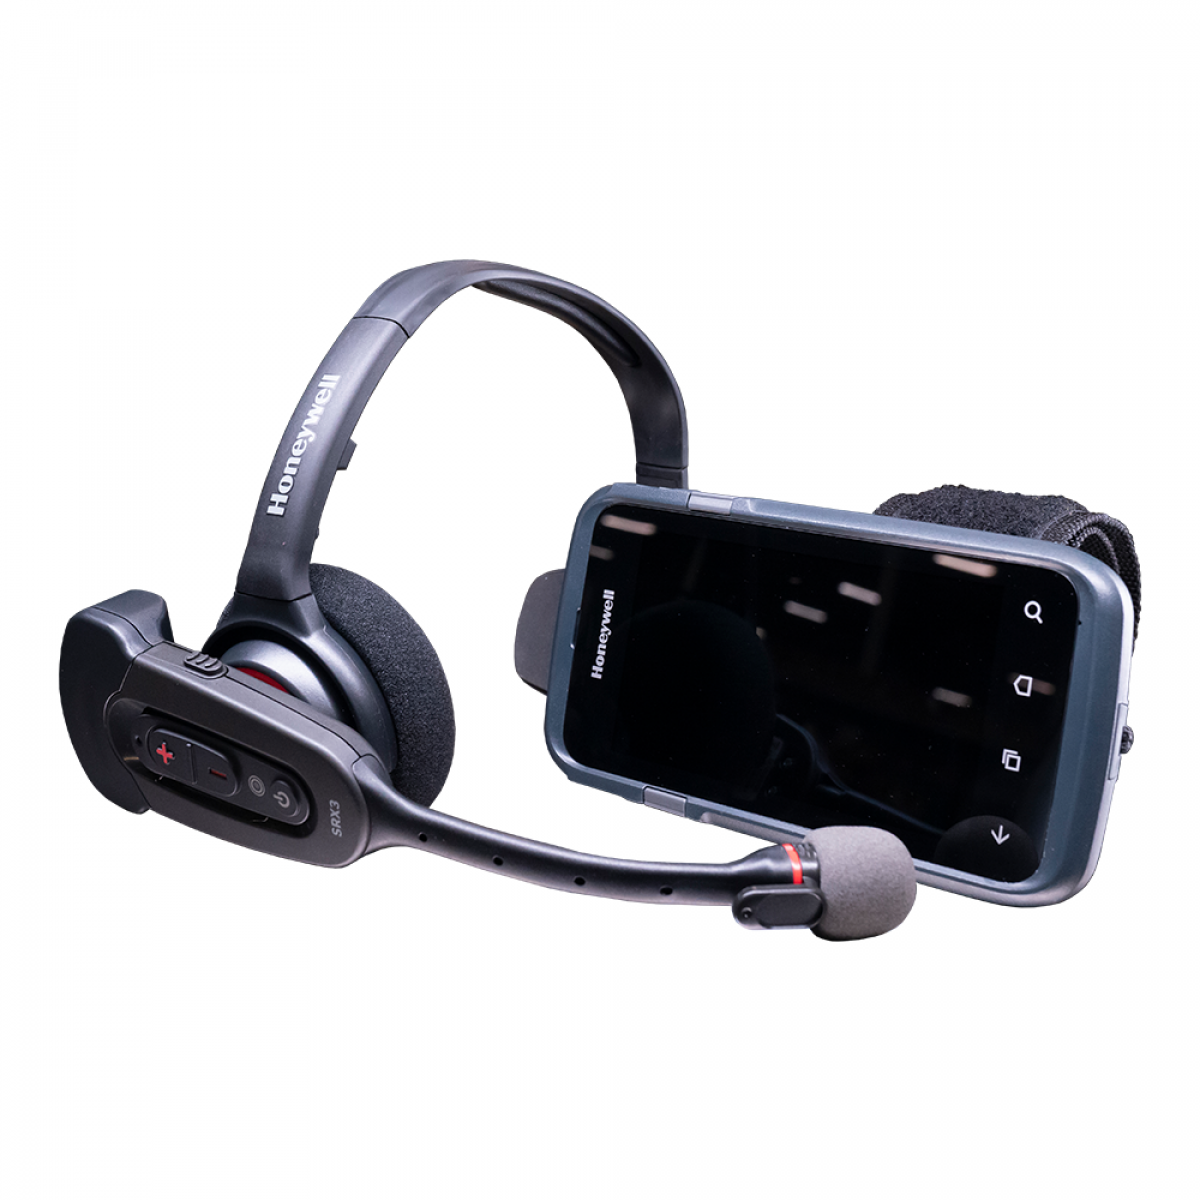 Honeywell CT60 wearable voice-enabled computer with SRX3 Headset